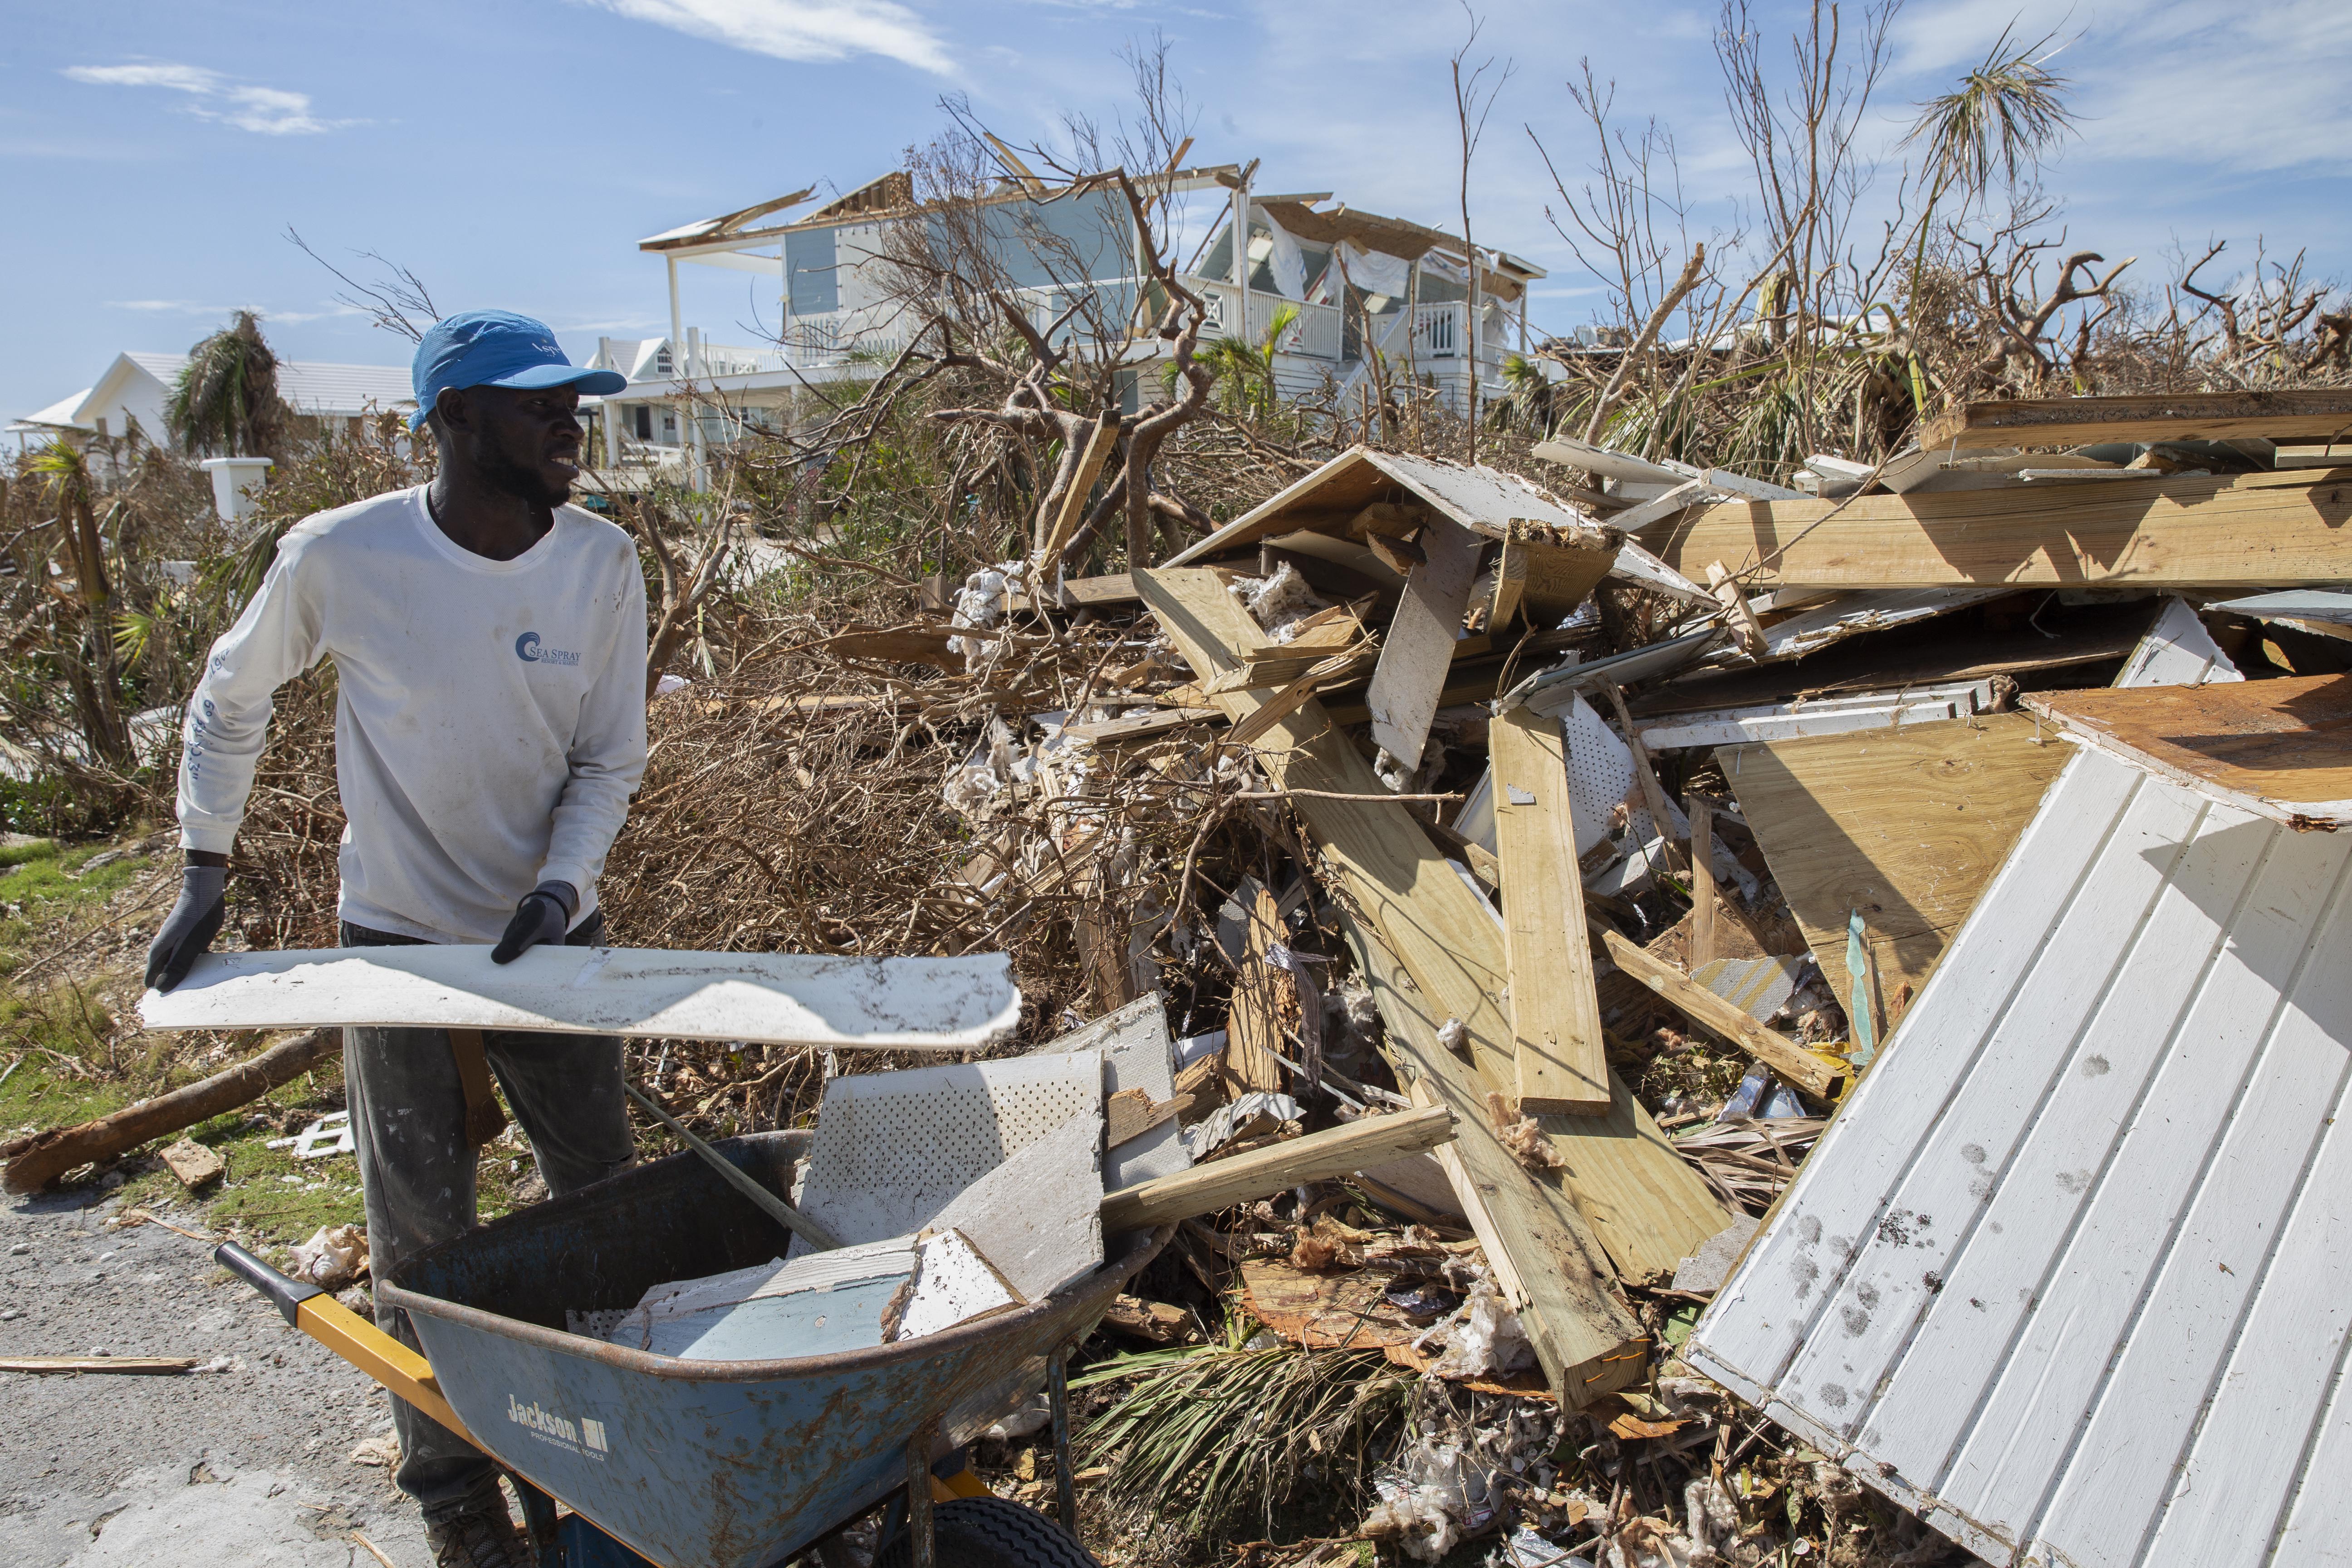 A resident collects rubble and debris from damaged homes after Hurricane Dorian devastated Elbow Key Island.